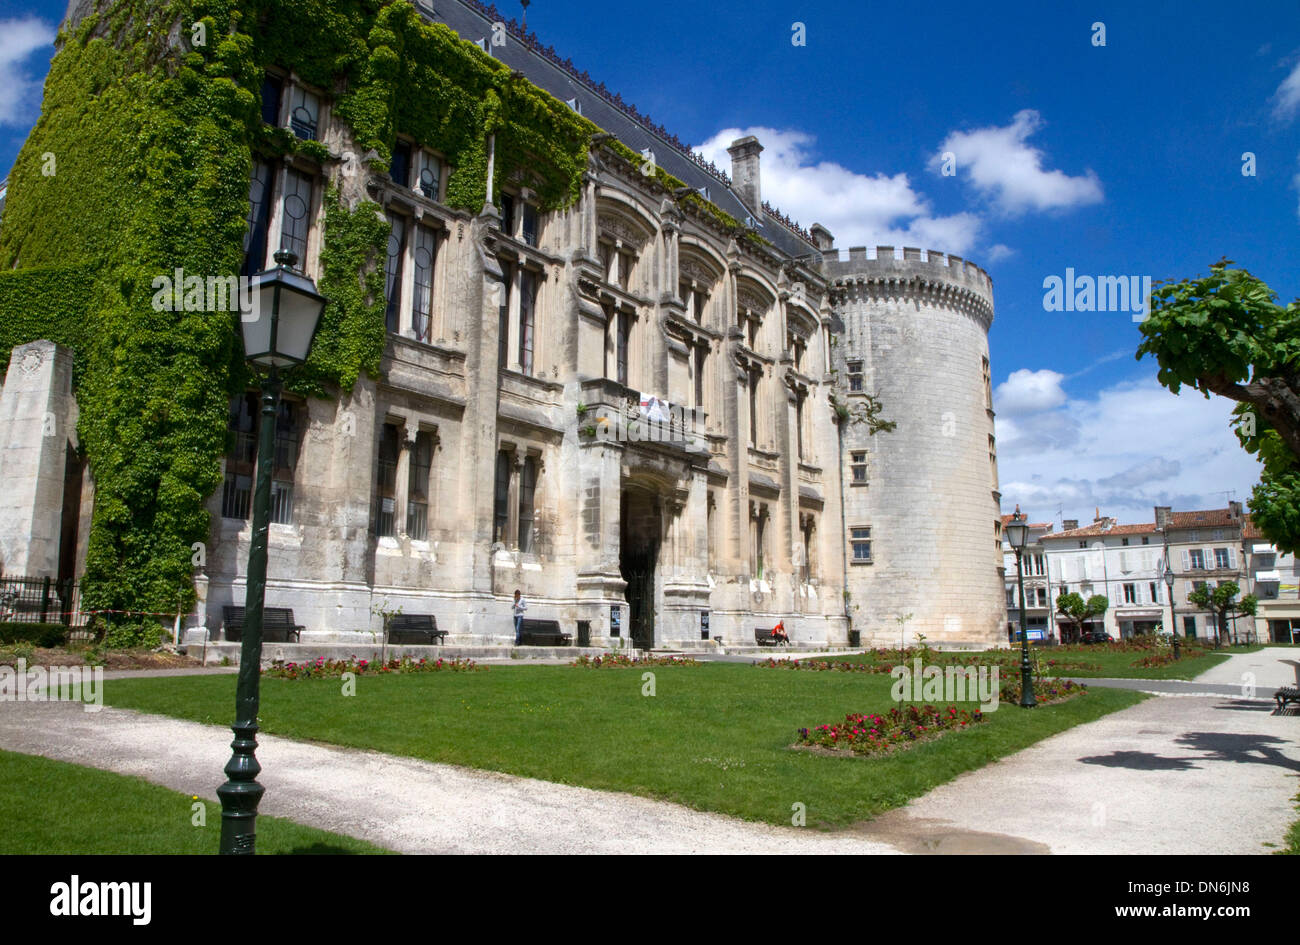 The Hotel de Ville at Angouleme in southwestern France. Stock Photo